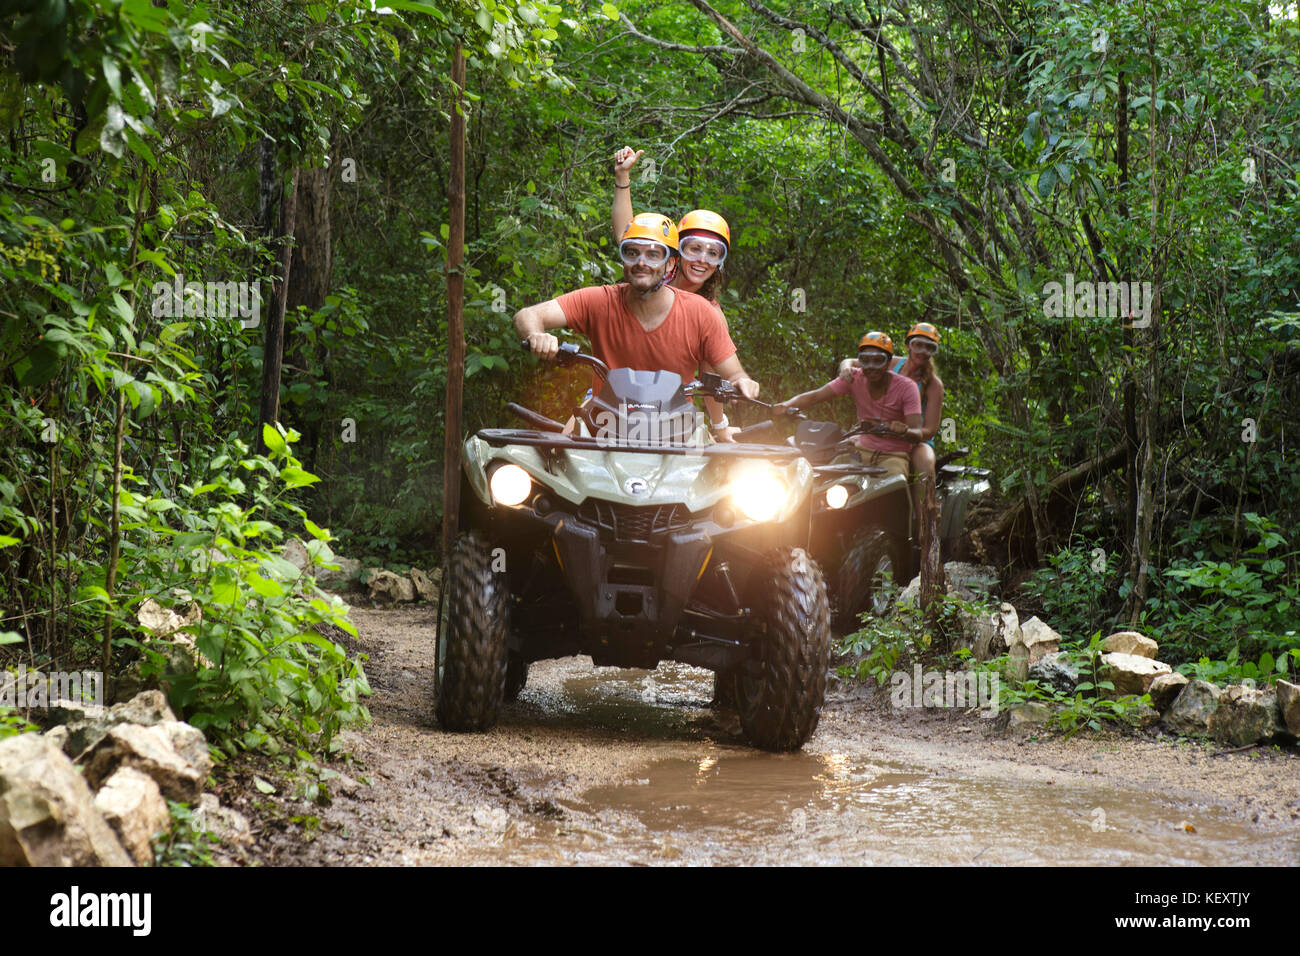 Front view of couples riding quad bikes in Emotions Native Park, Quintana Roo, Mexico Stock Photo